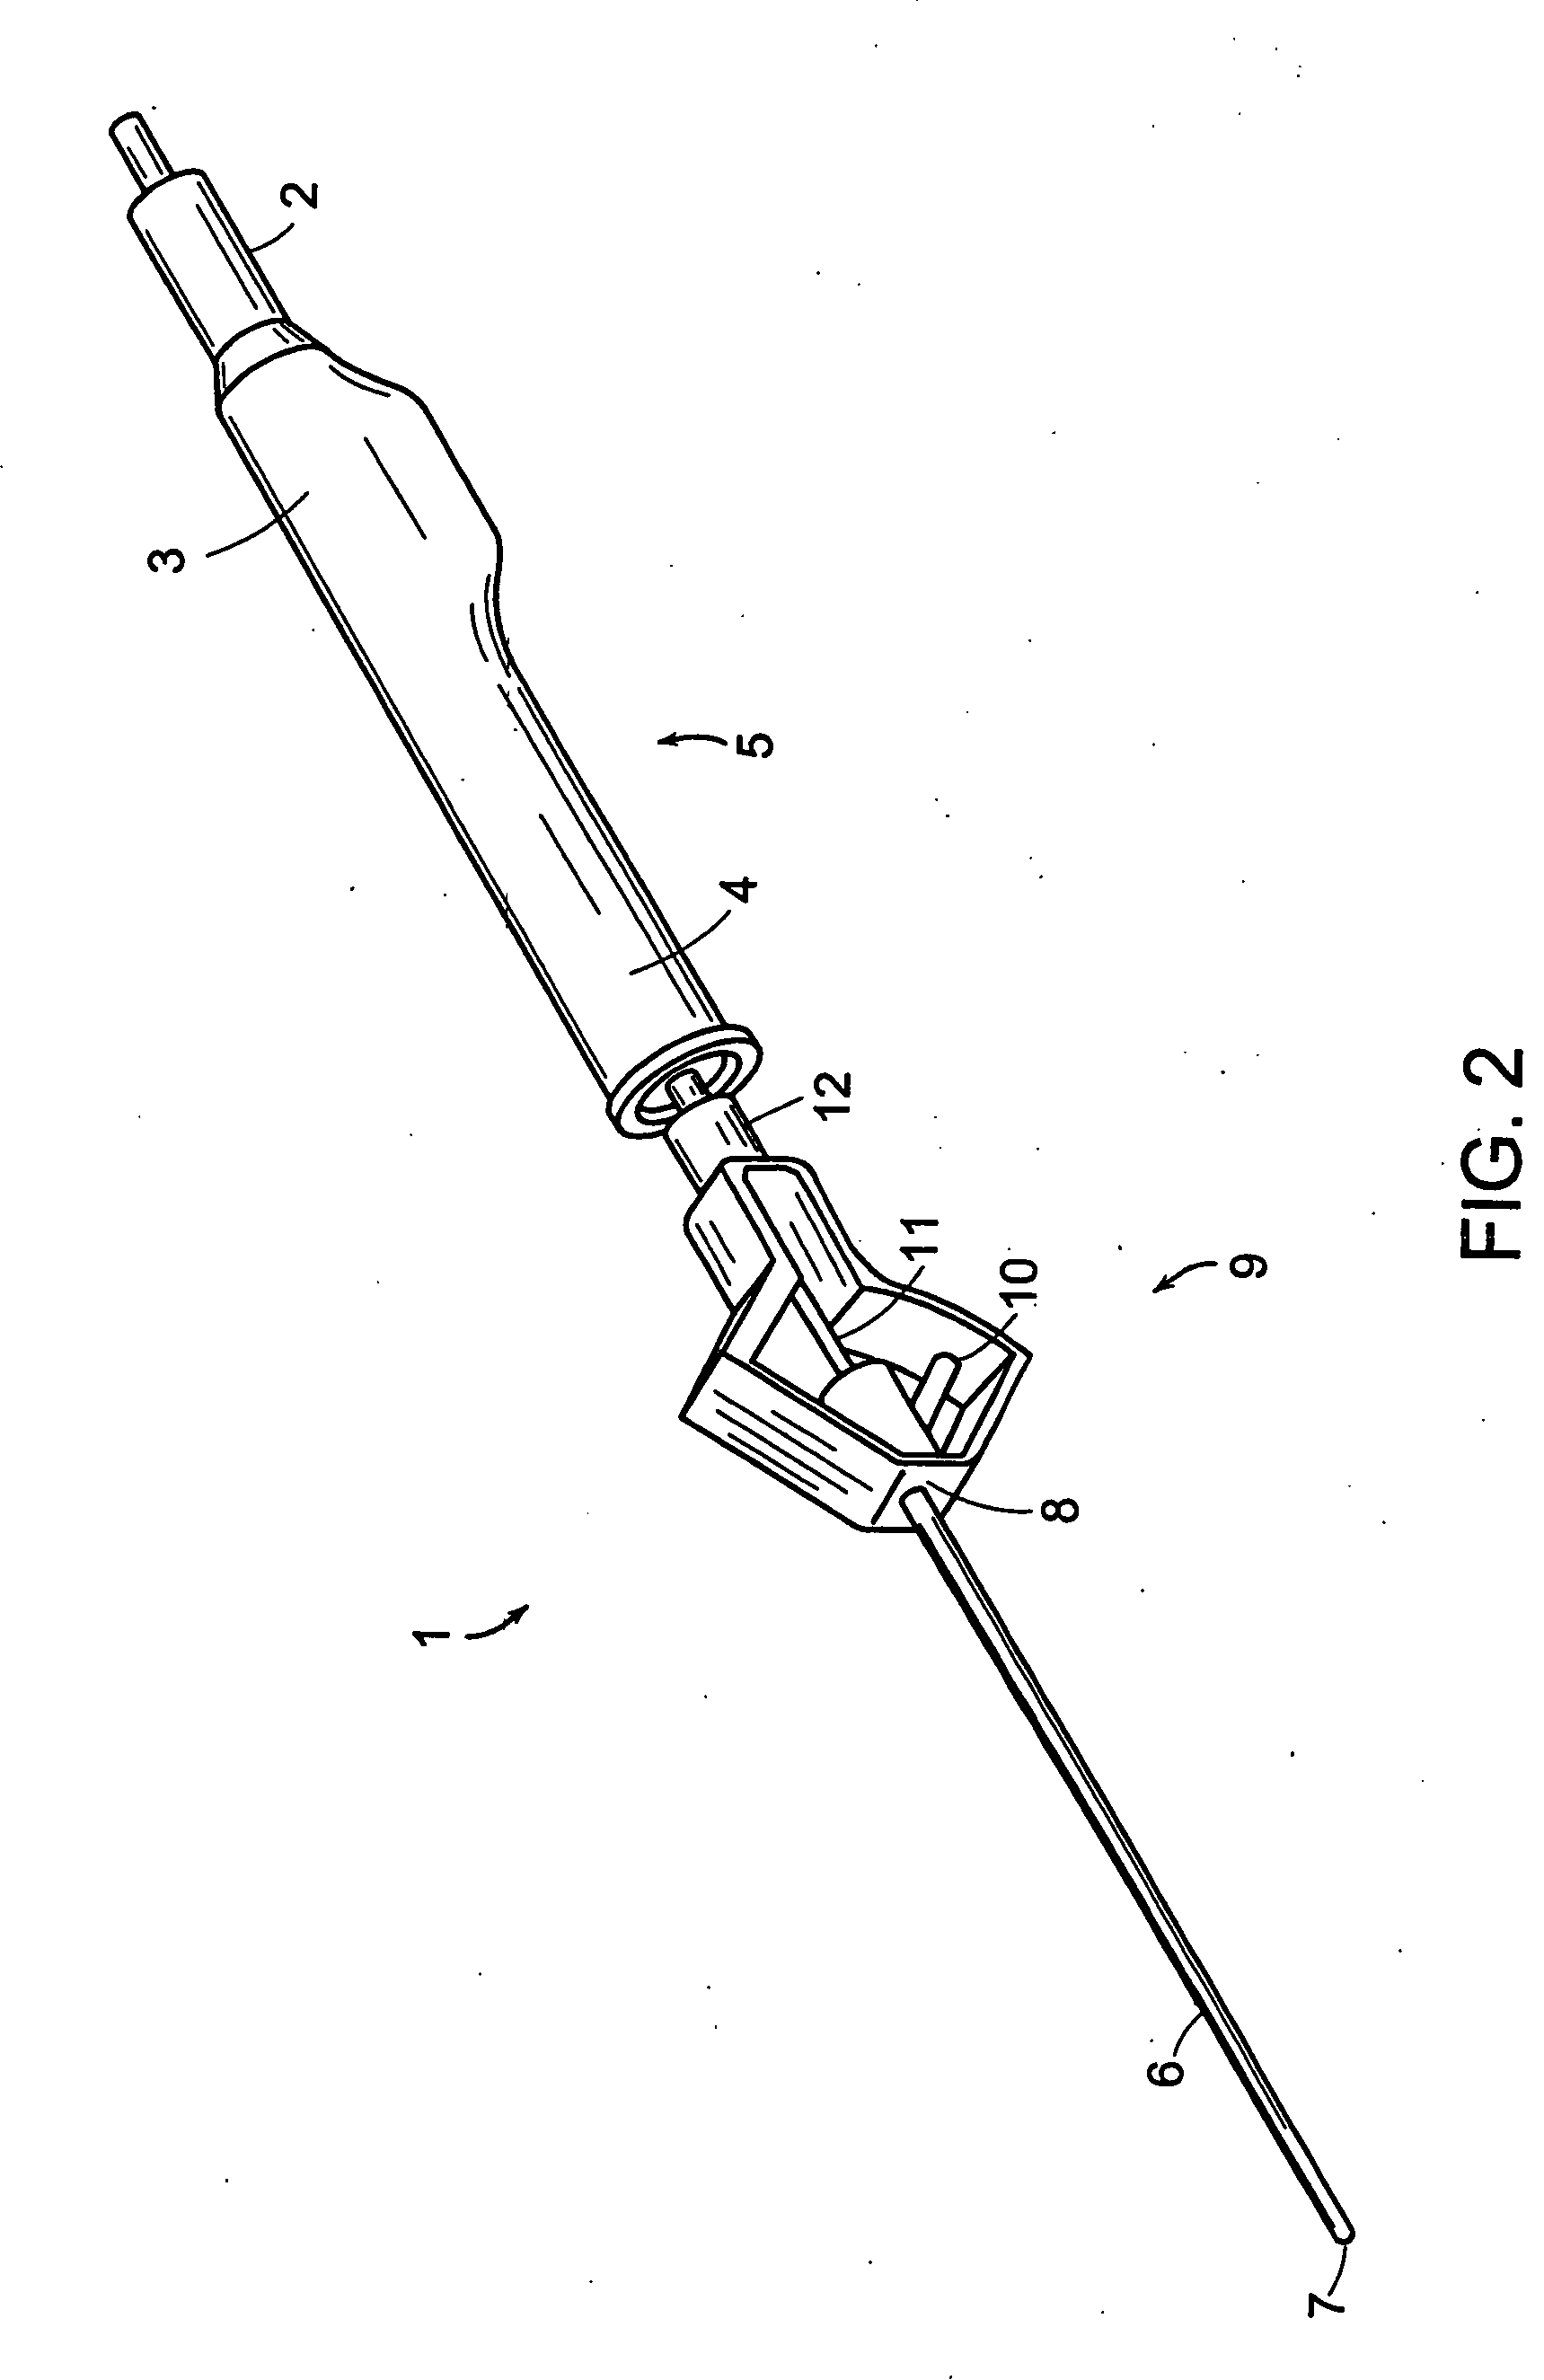 Method for removing plaque from blood vessels using ultrasonic energy